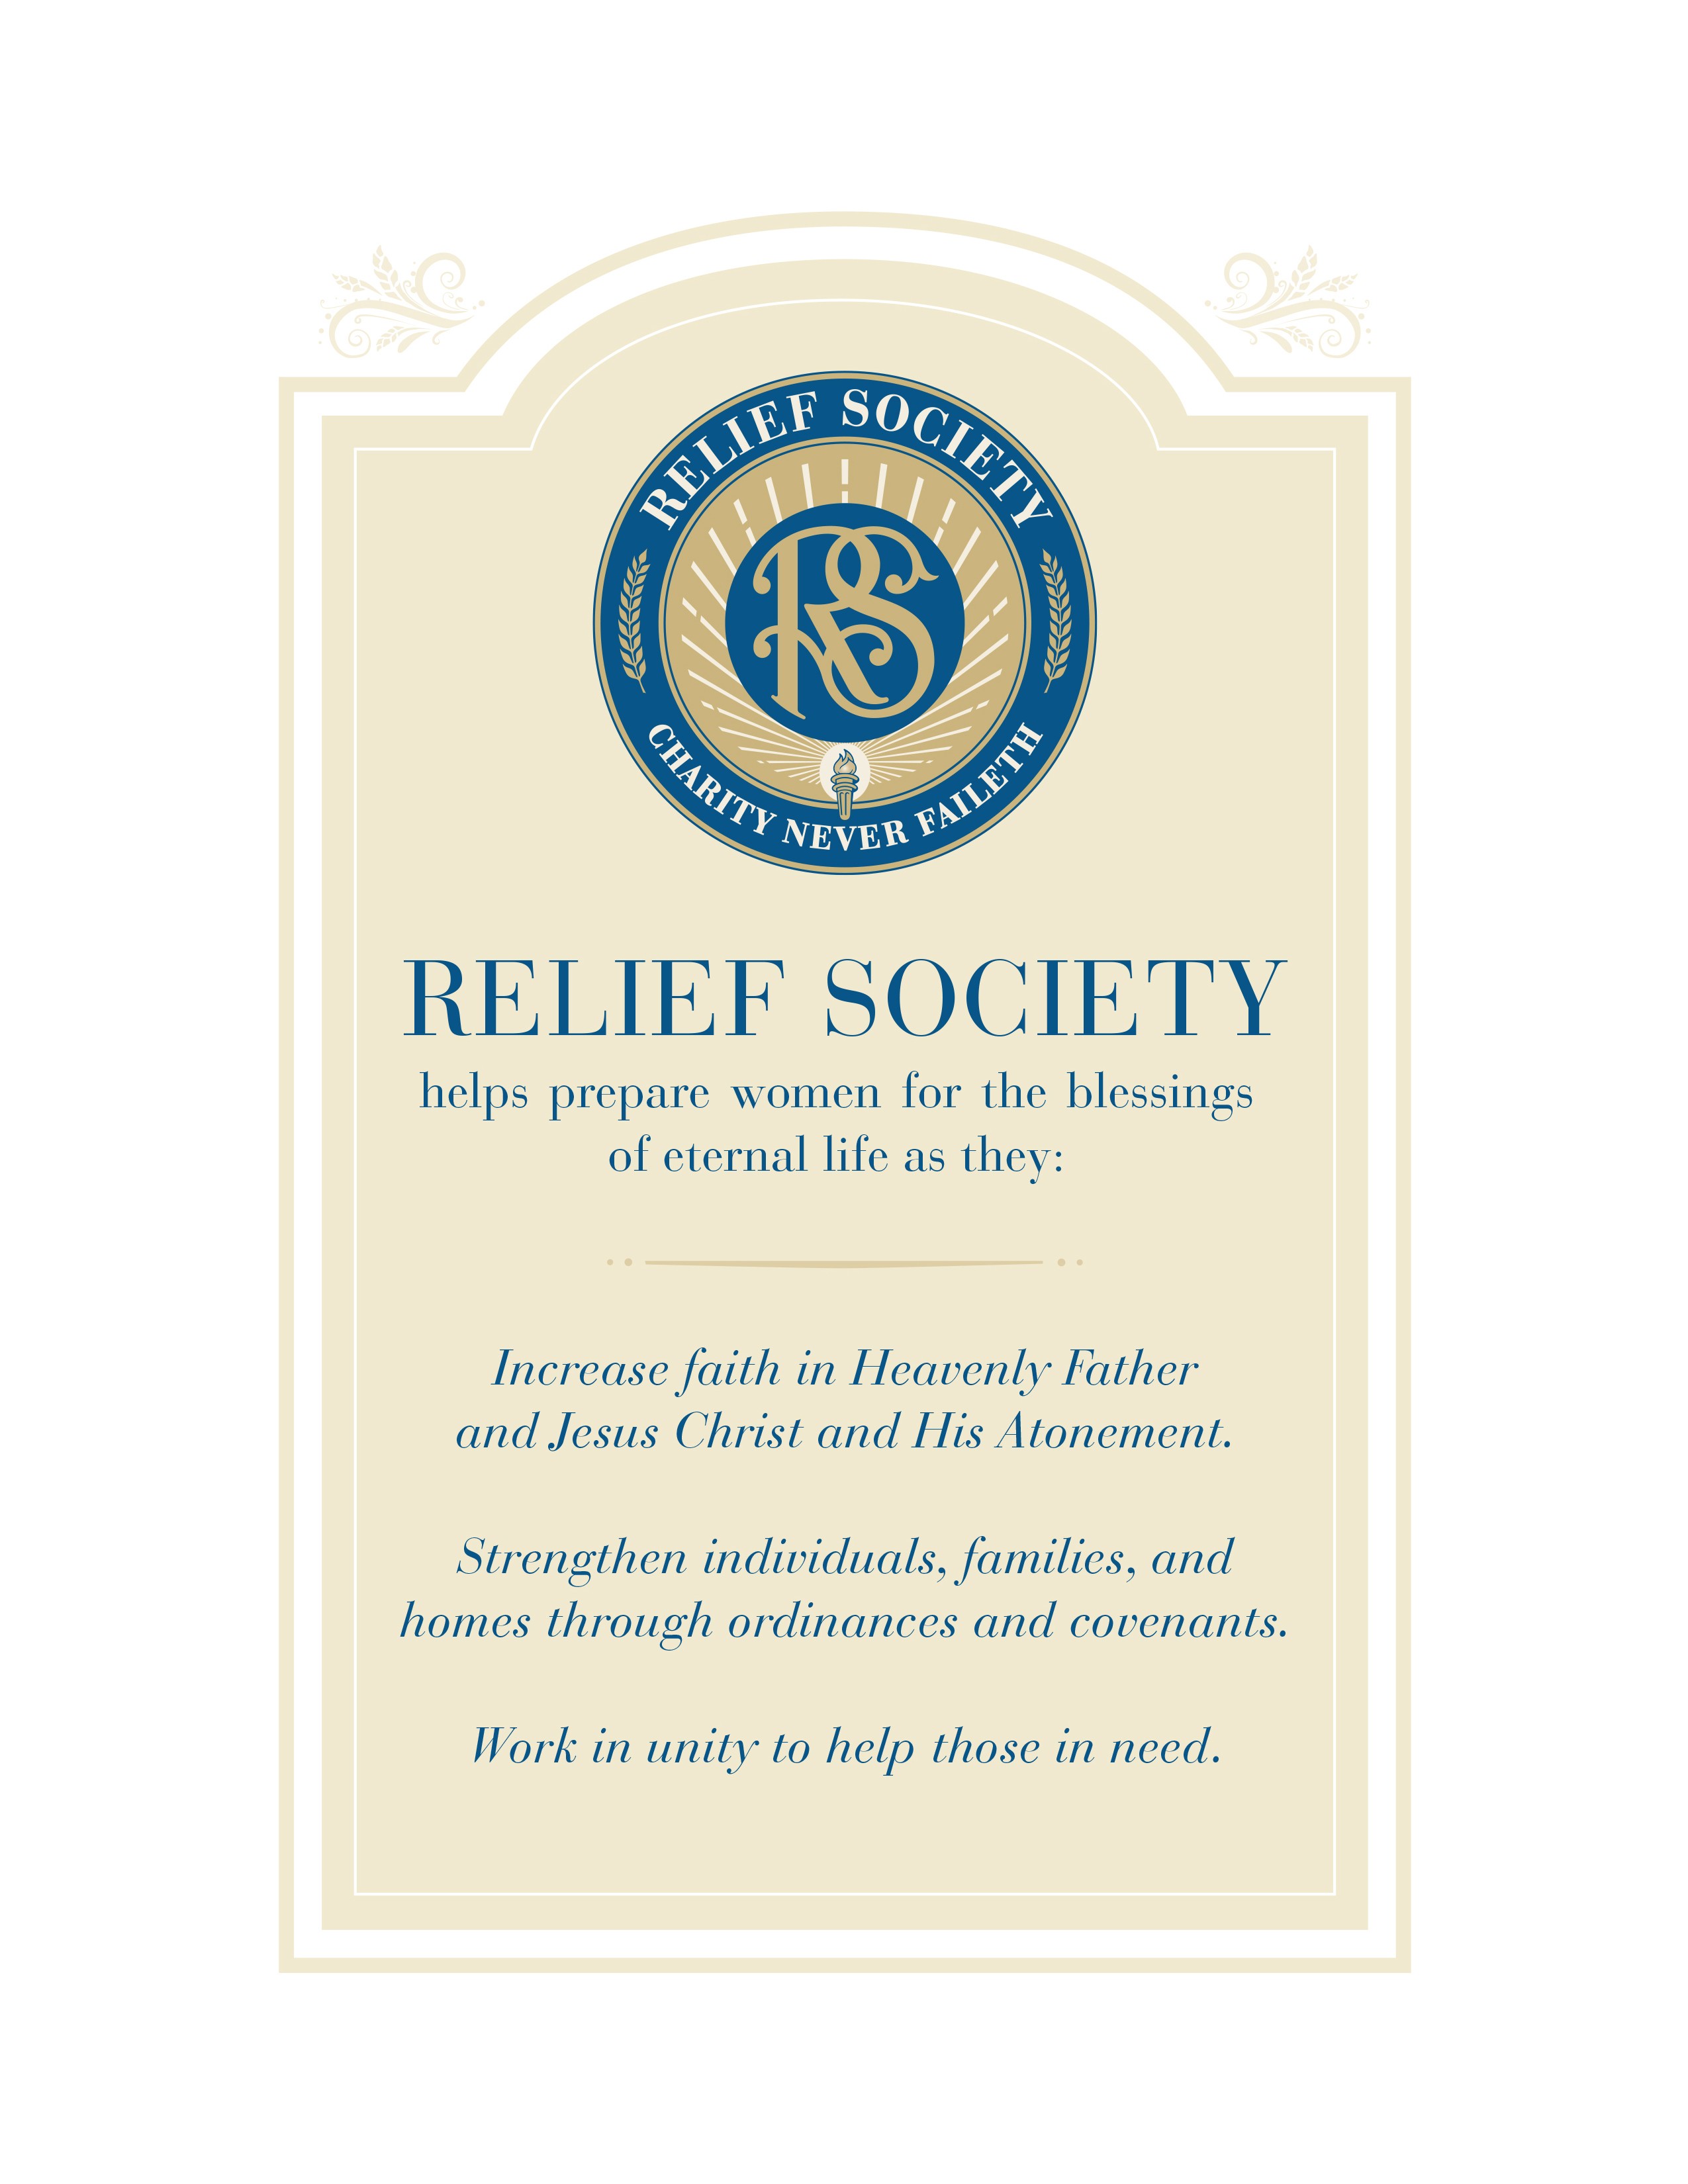 A poster bearing the official seal of the Relief Society and the purpose of Relief Society, which reads:   “Relief Society helps prepare women for the blessings of eternal life as they:  Increase faith in Heavenly Father and Jesus Christ and His Atonement.  Strengthen individuals, families, and homes through ordinances and covenants.  Work in unity to help those in need.”